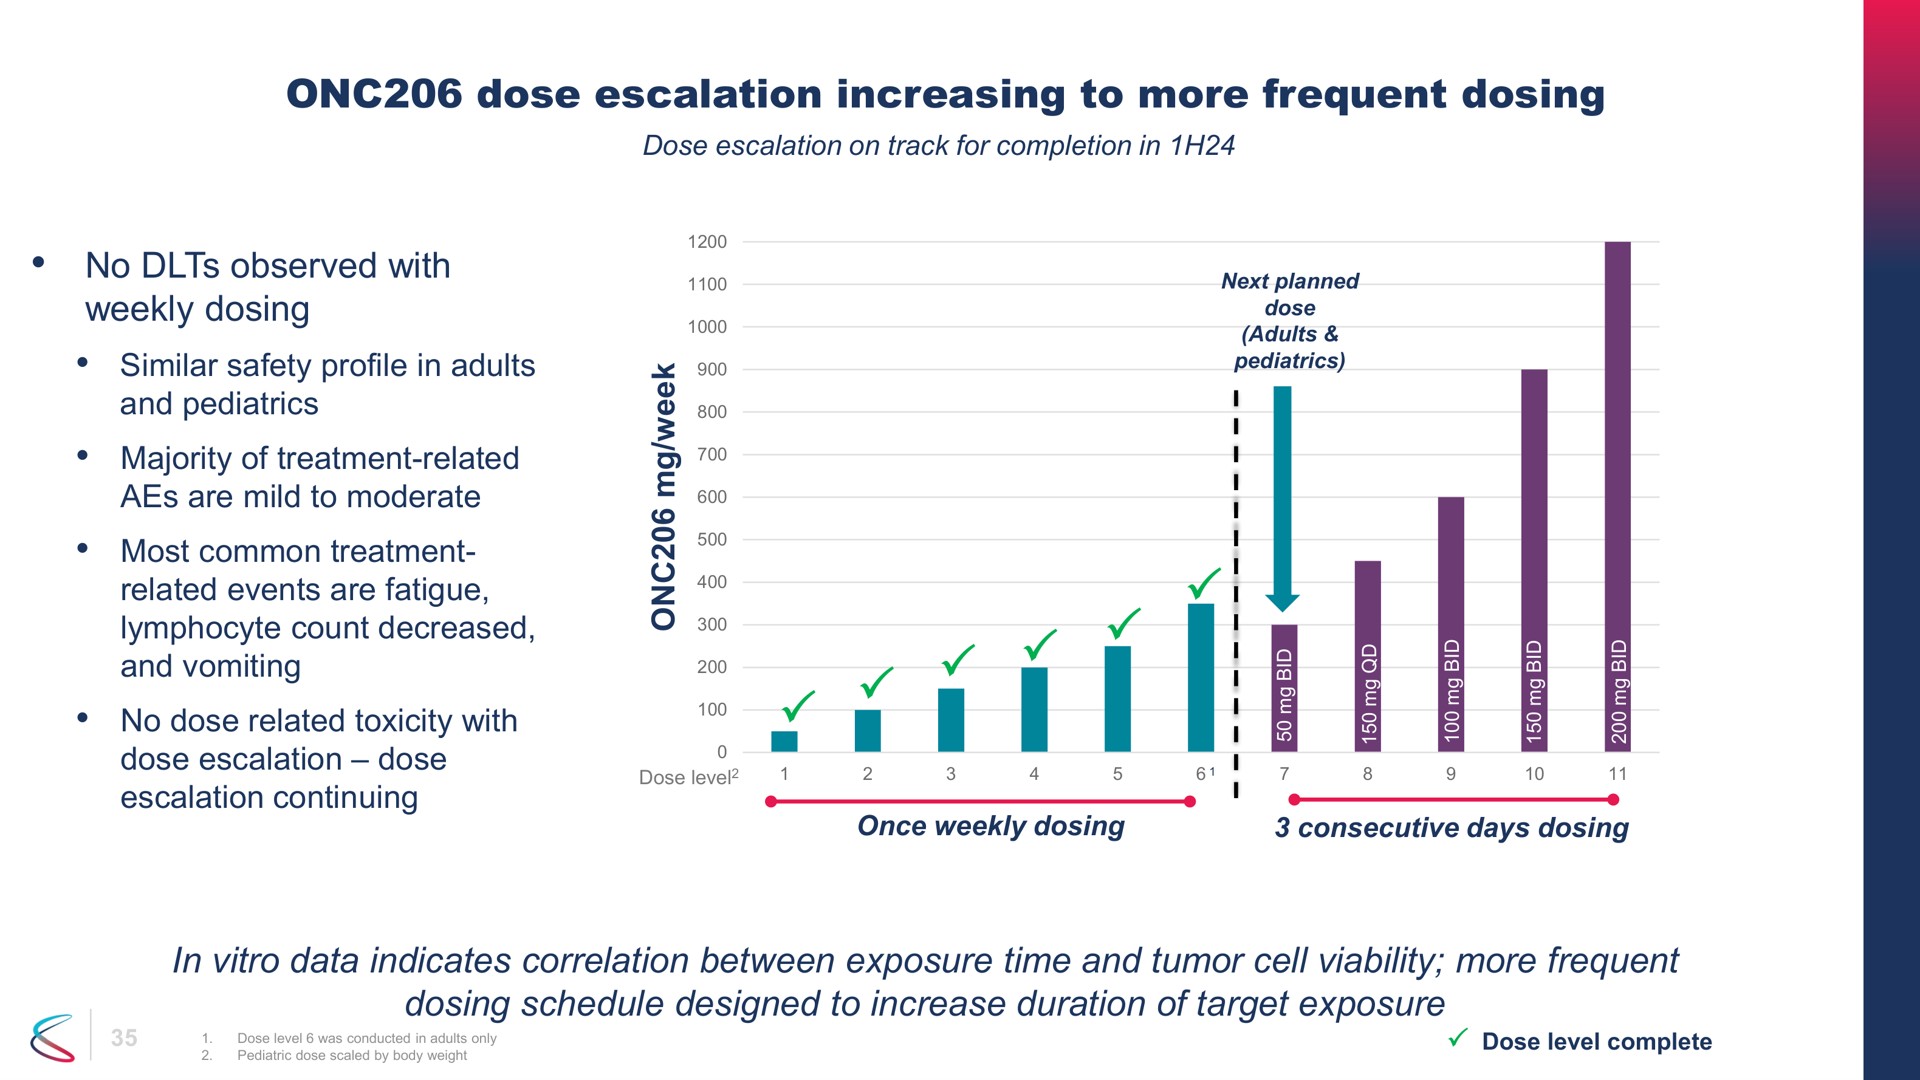 dose increasing to more frequent dosing no observed with weekly dosing in data indicates correlation between exposure time and tumor cell viability more frequent dosing schedule designed to increase duration of target exposure most common treatment | Chimerix